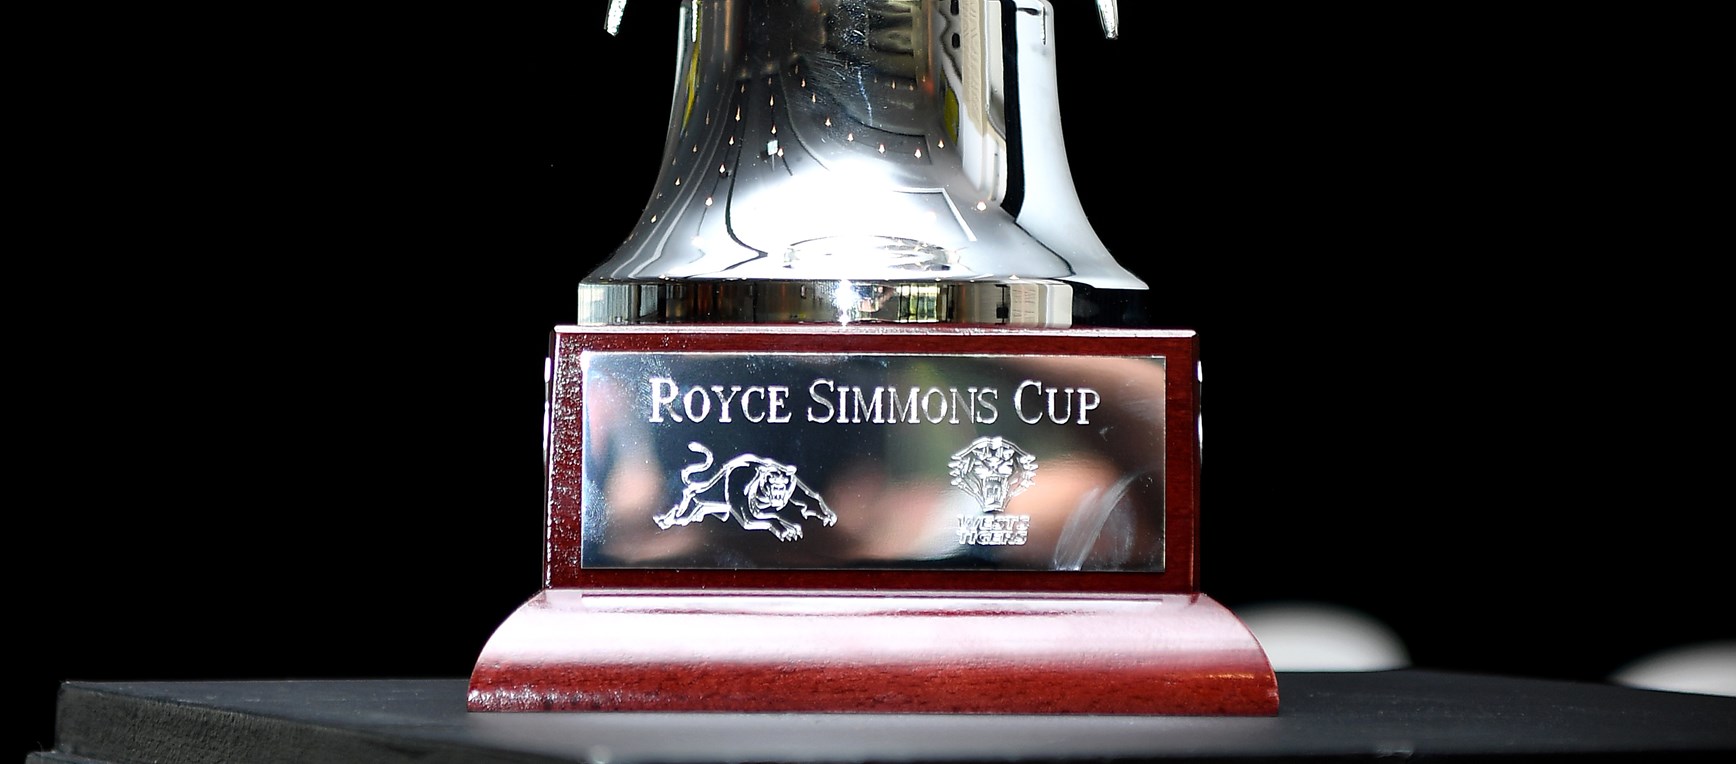 Gallery Round 18: Royce Simmons Cup